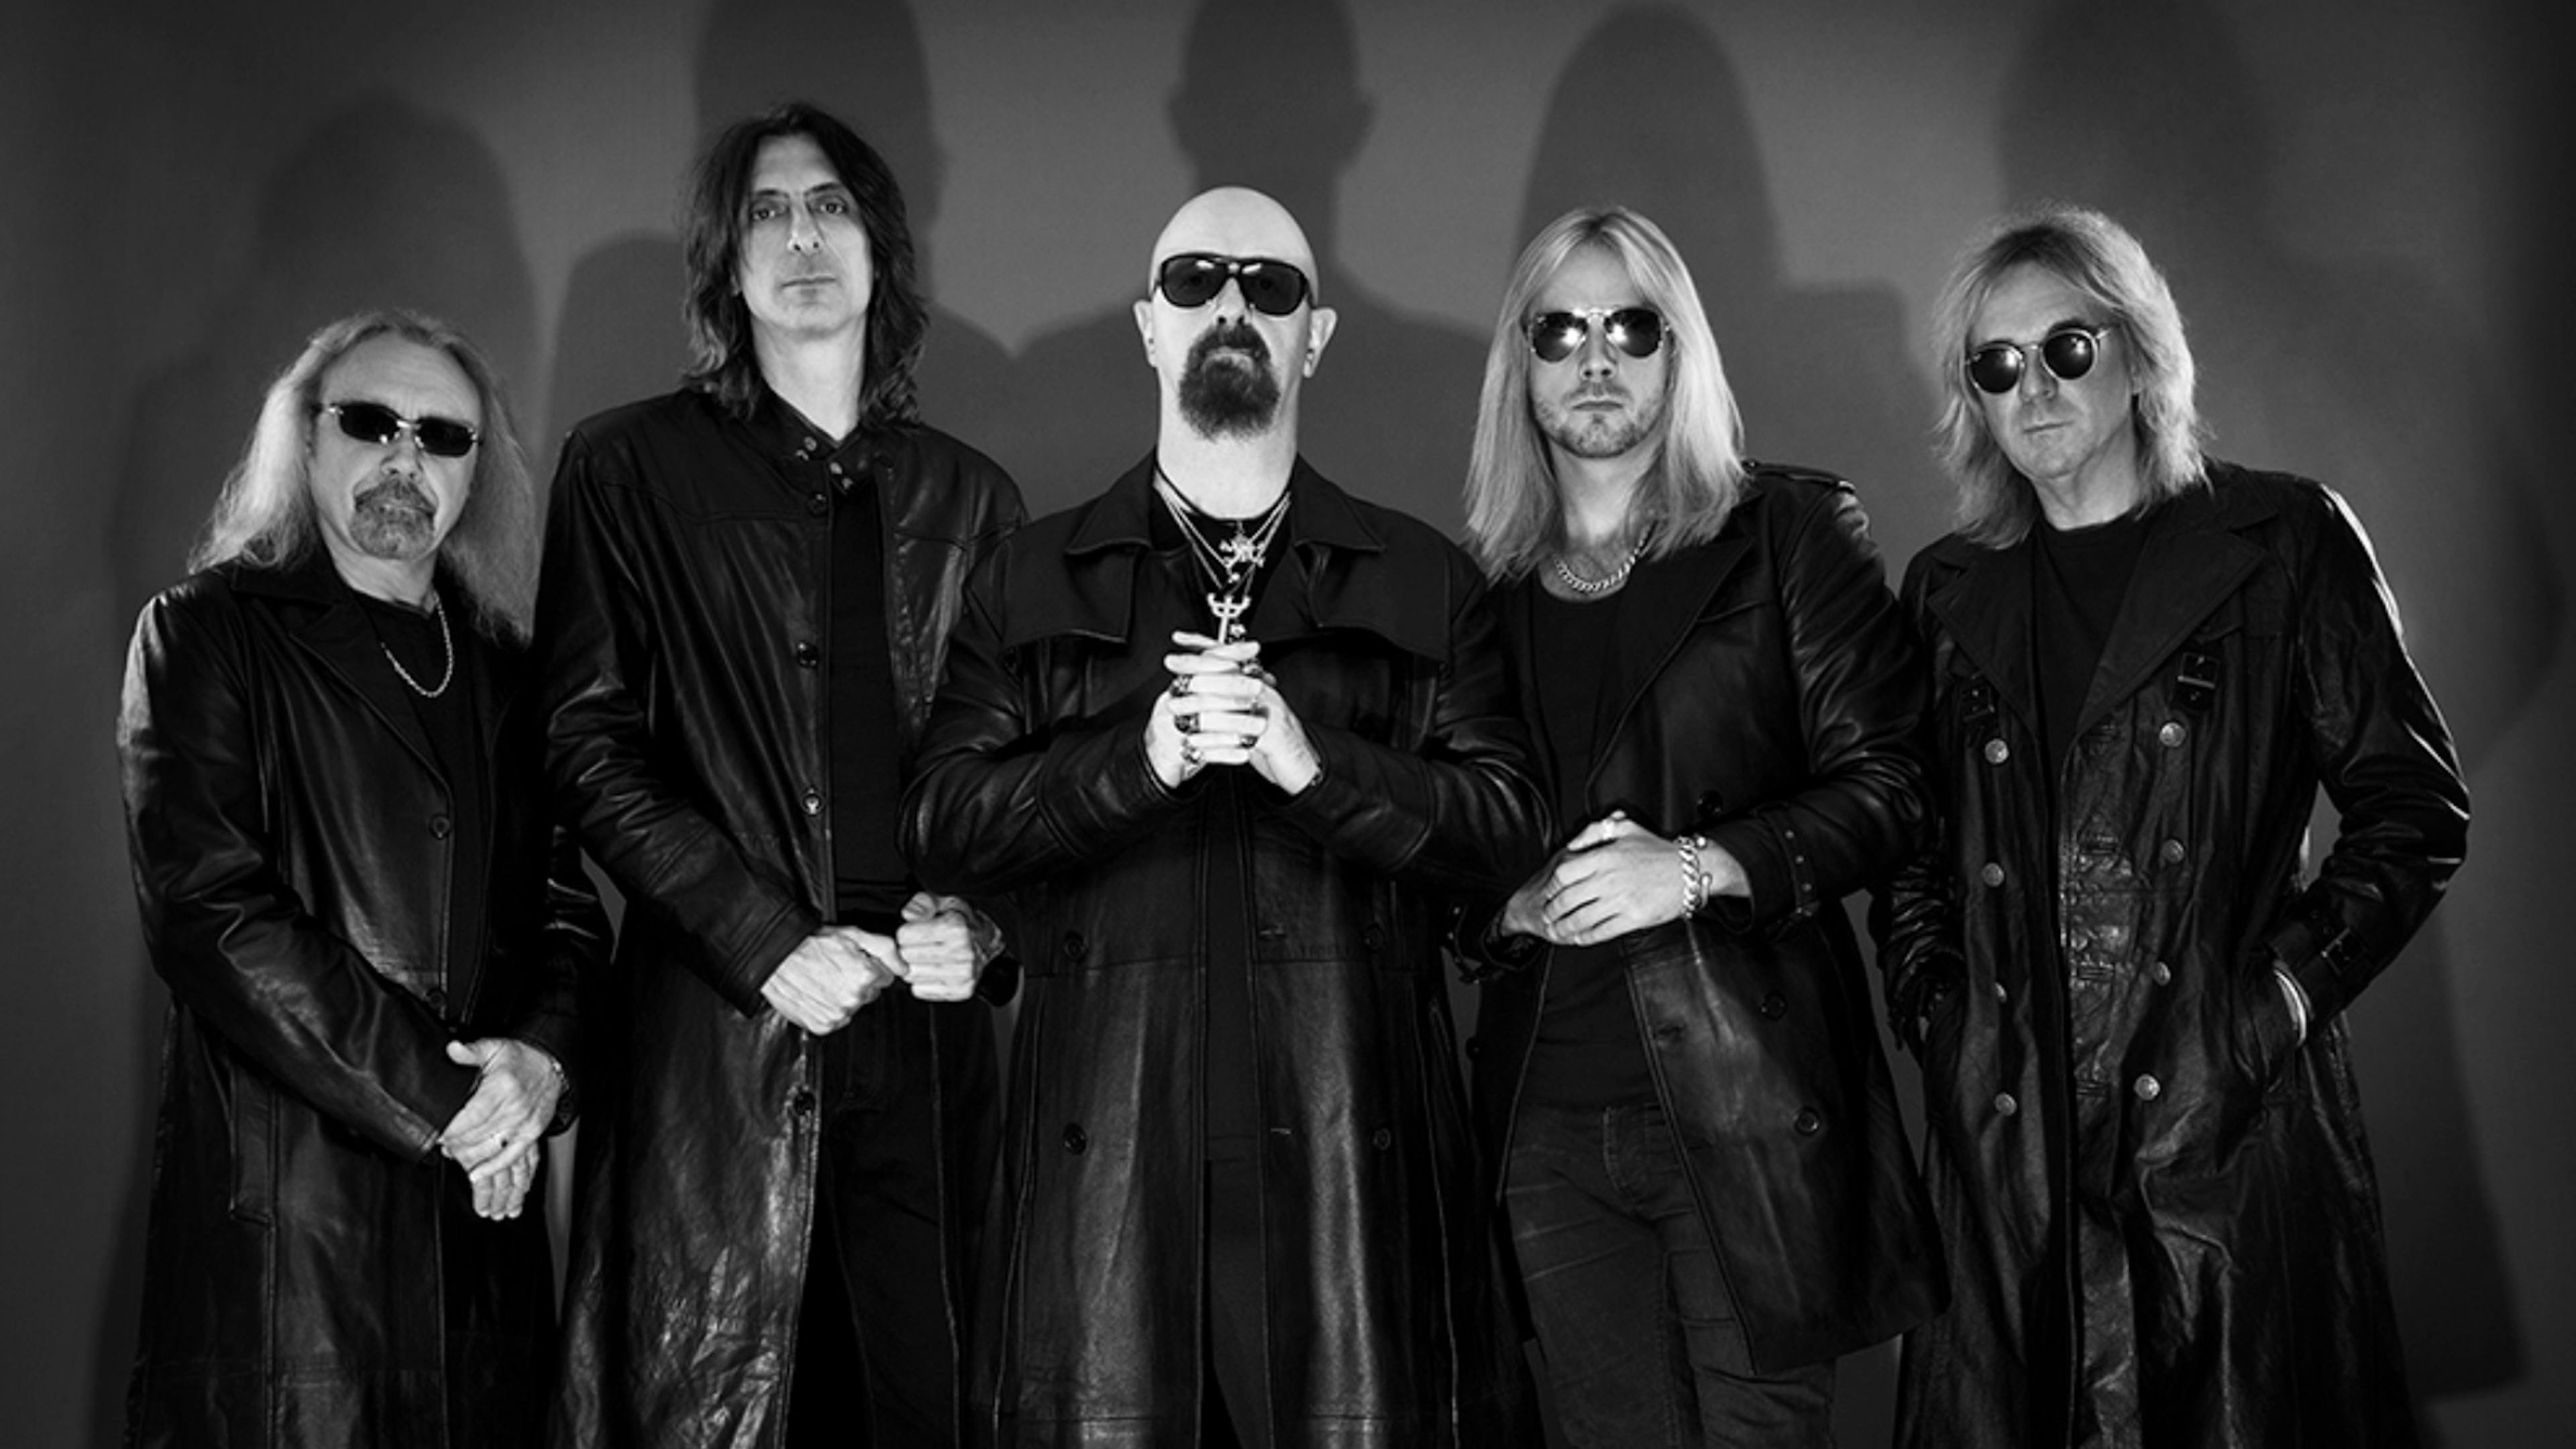 Rob Halford: New Judas Priest Will "Capture The Emotion Of What We're Going Through Together"